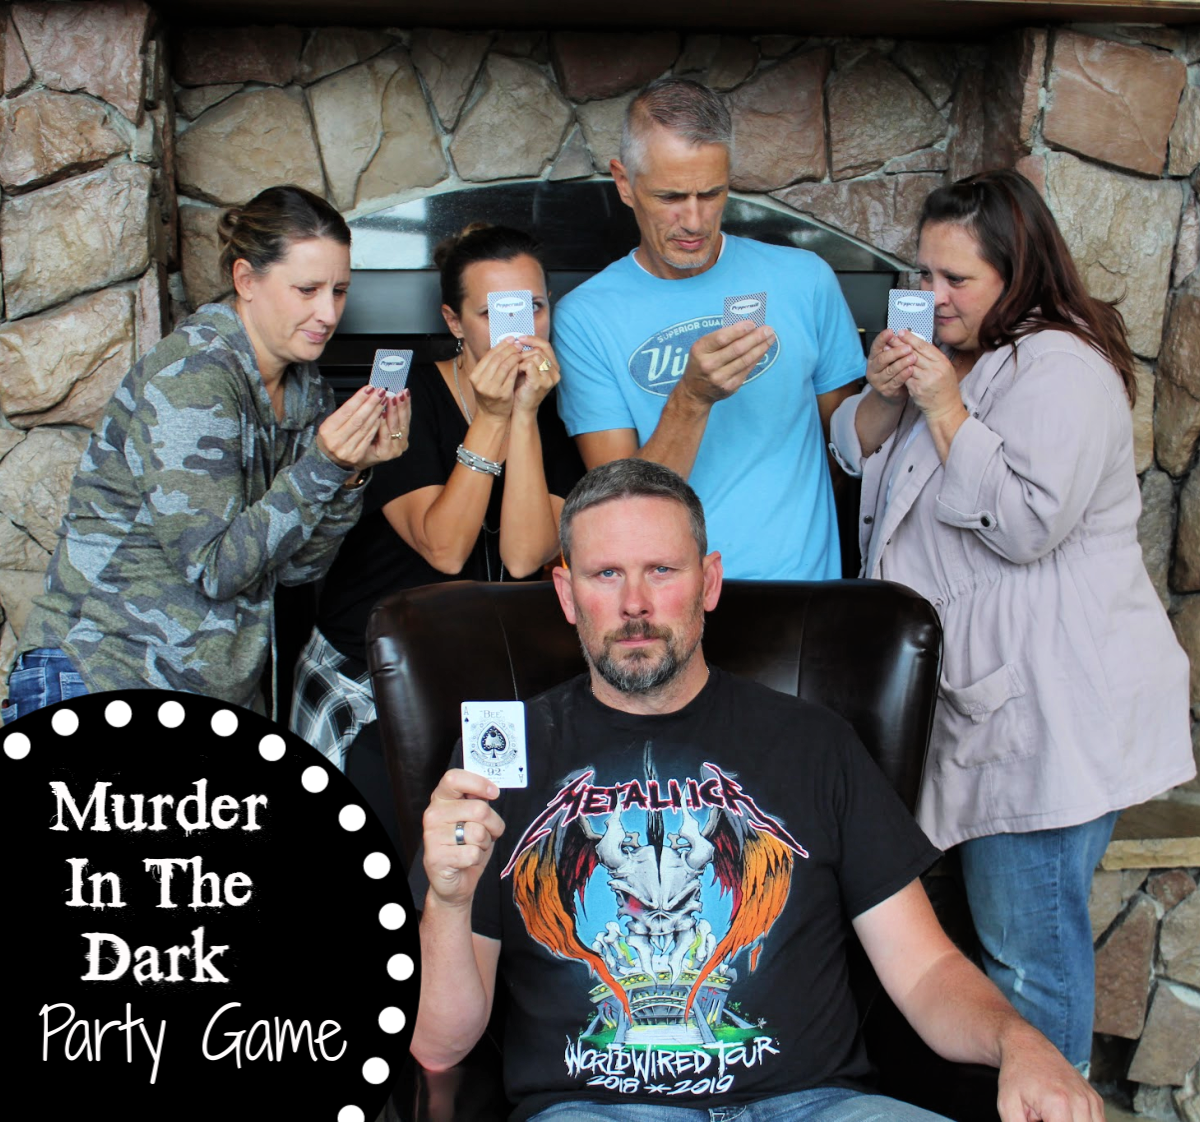 Fun Murder in the Dark party game. Play this game at your next party, it's such fun and so simple to put together. #partygame #murderinthedarkgame #fungames #funpartygames